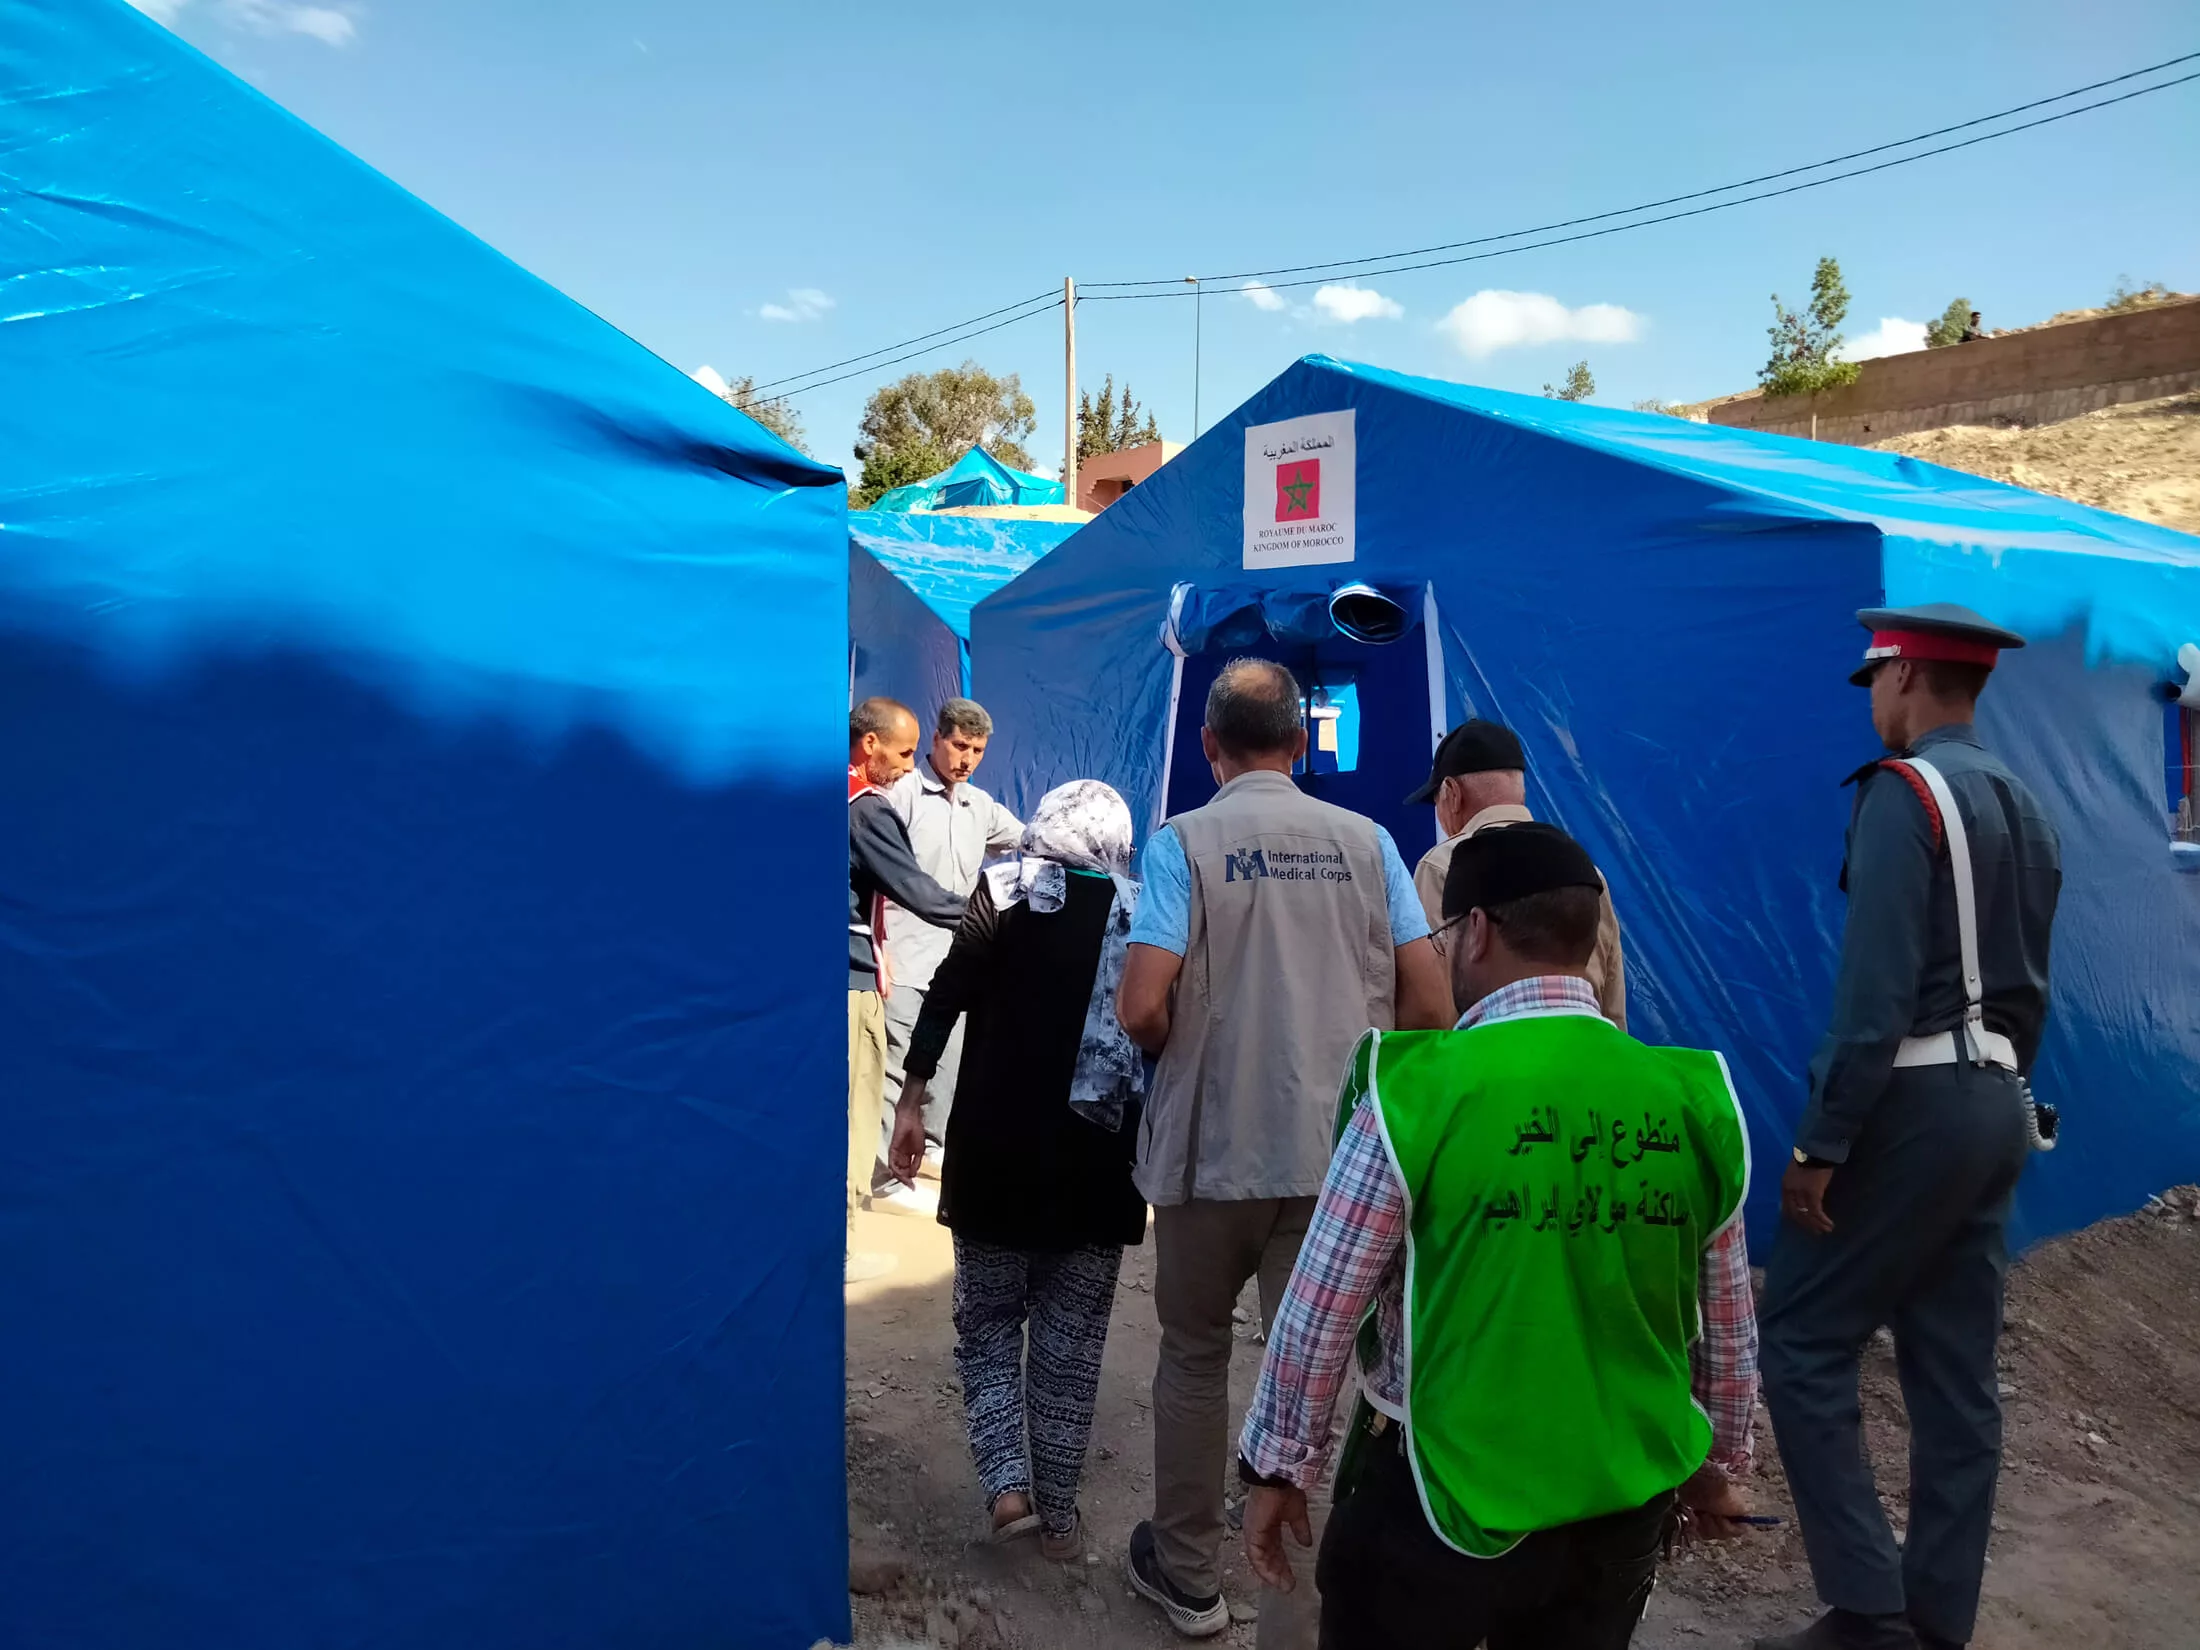 International Medical Corps staff provide support at a civil society tented camp set up for families affected by the earthquakes.